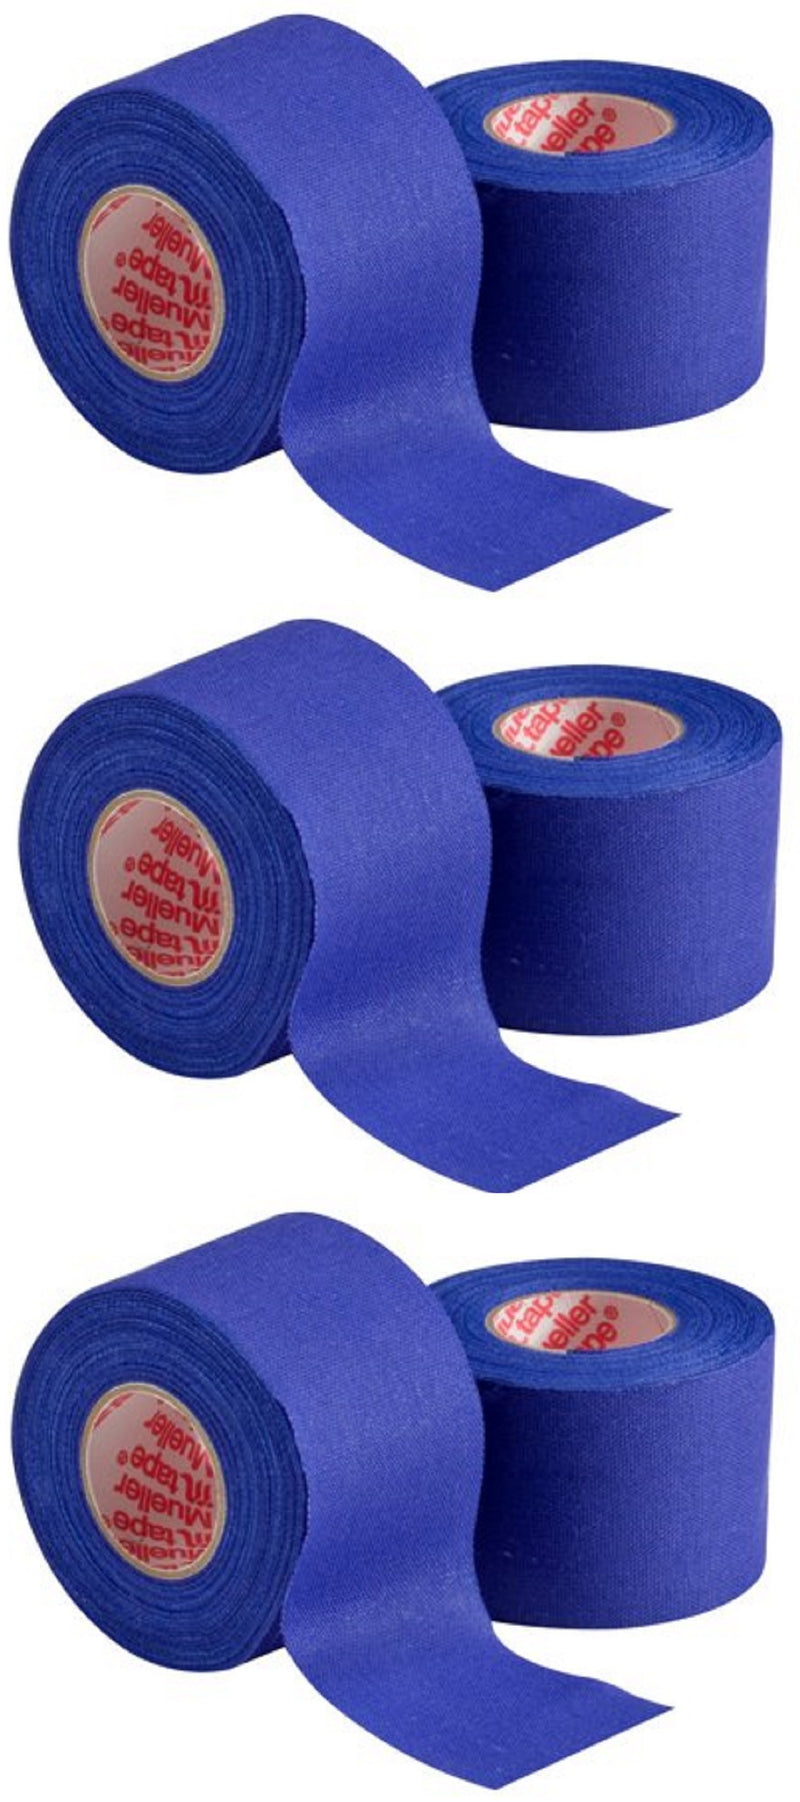 MTape Athletic Tape, Retail Packaging - 1.5 x 10 yd - Royal Blue